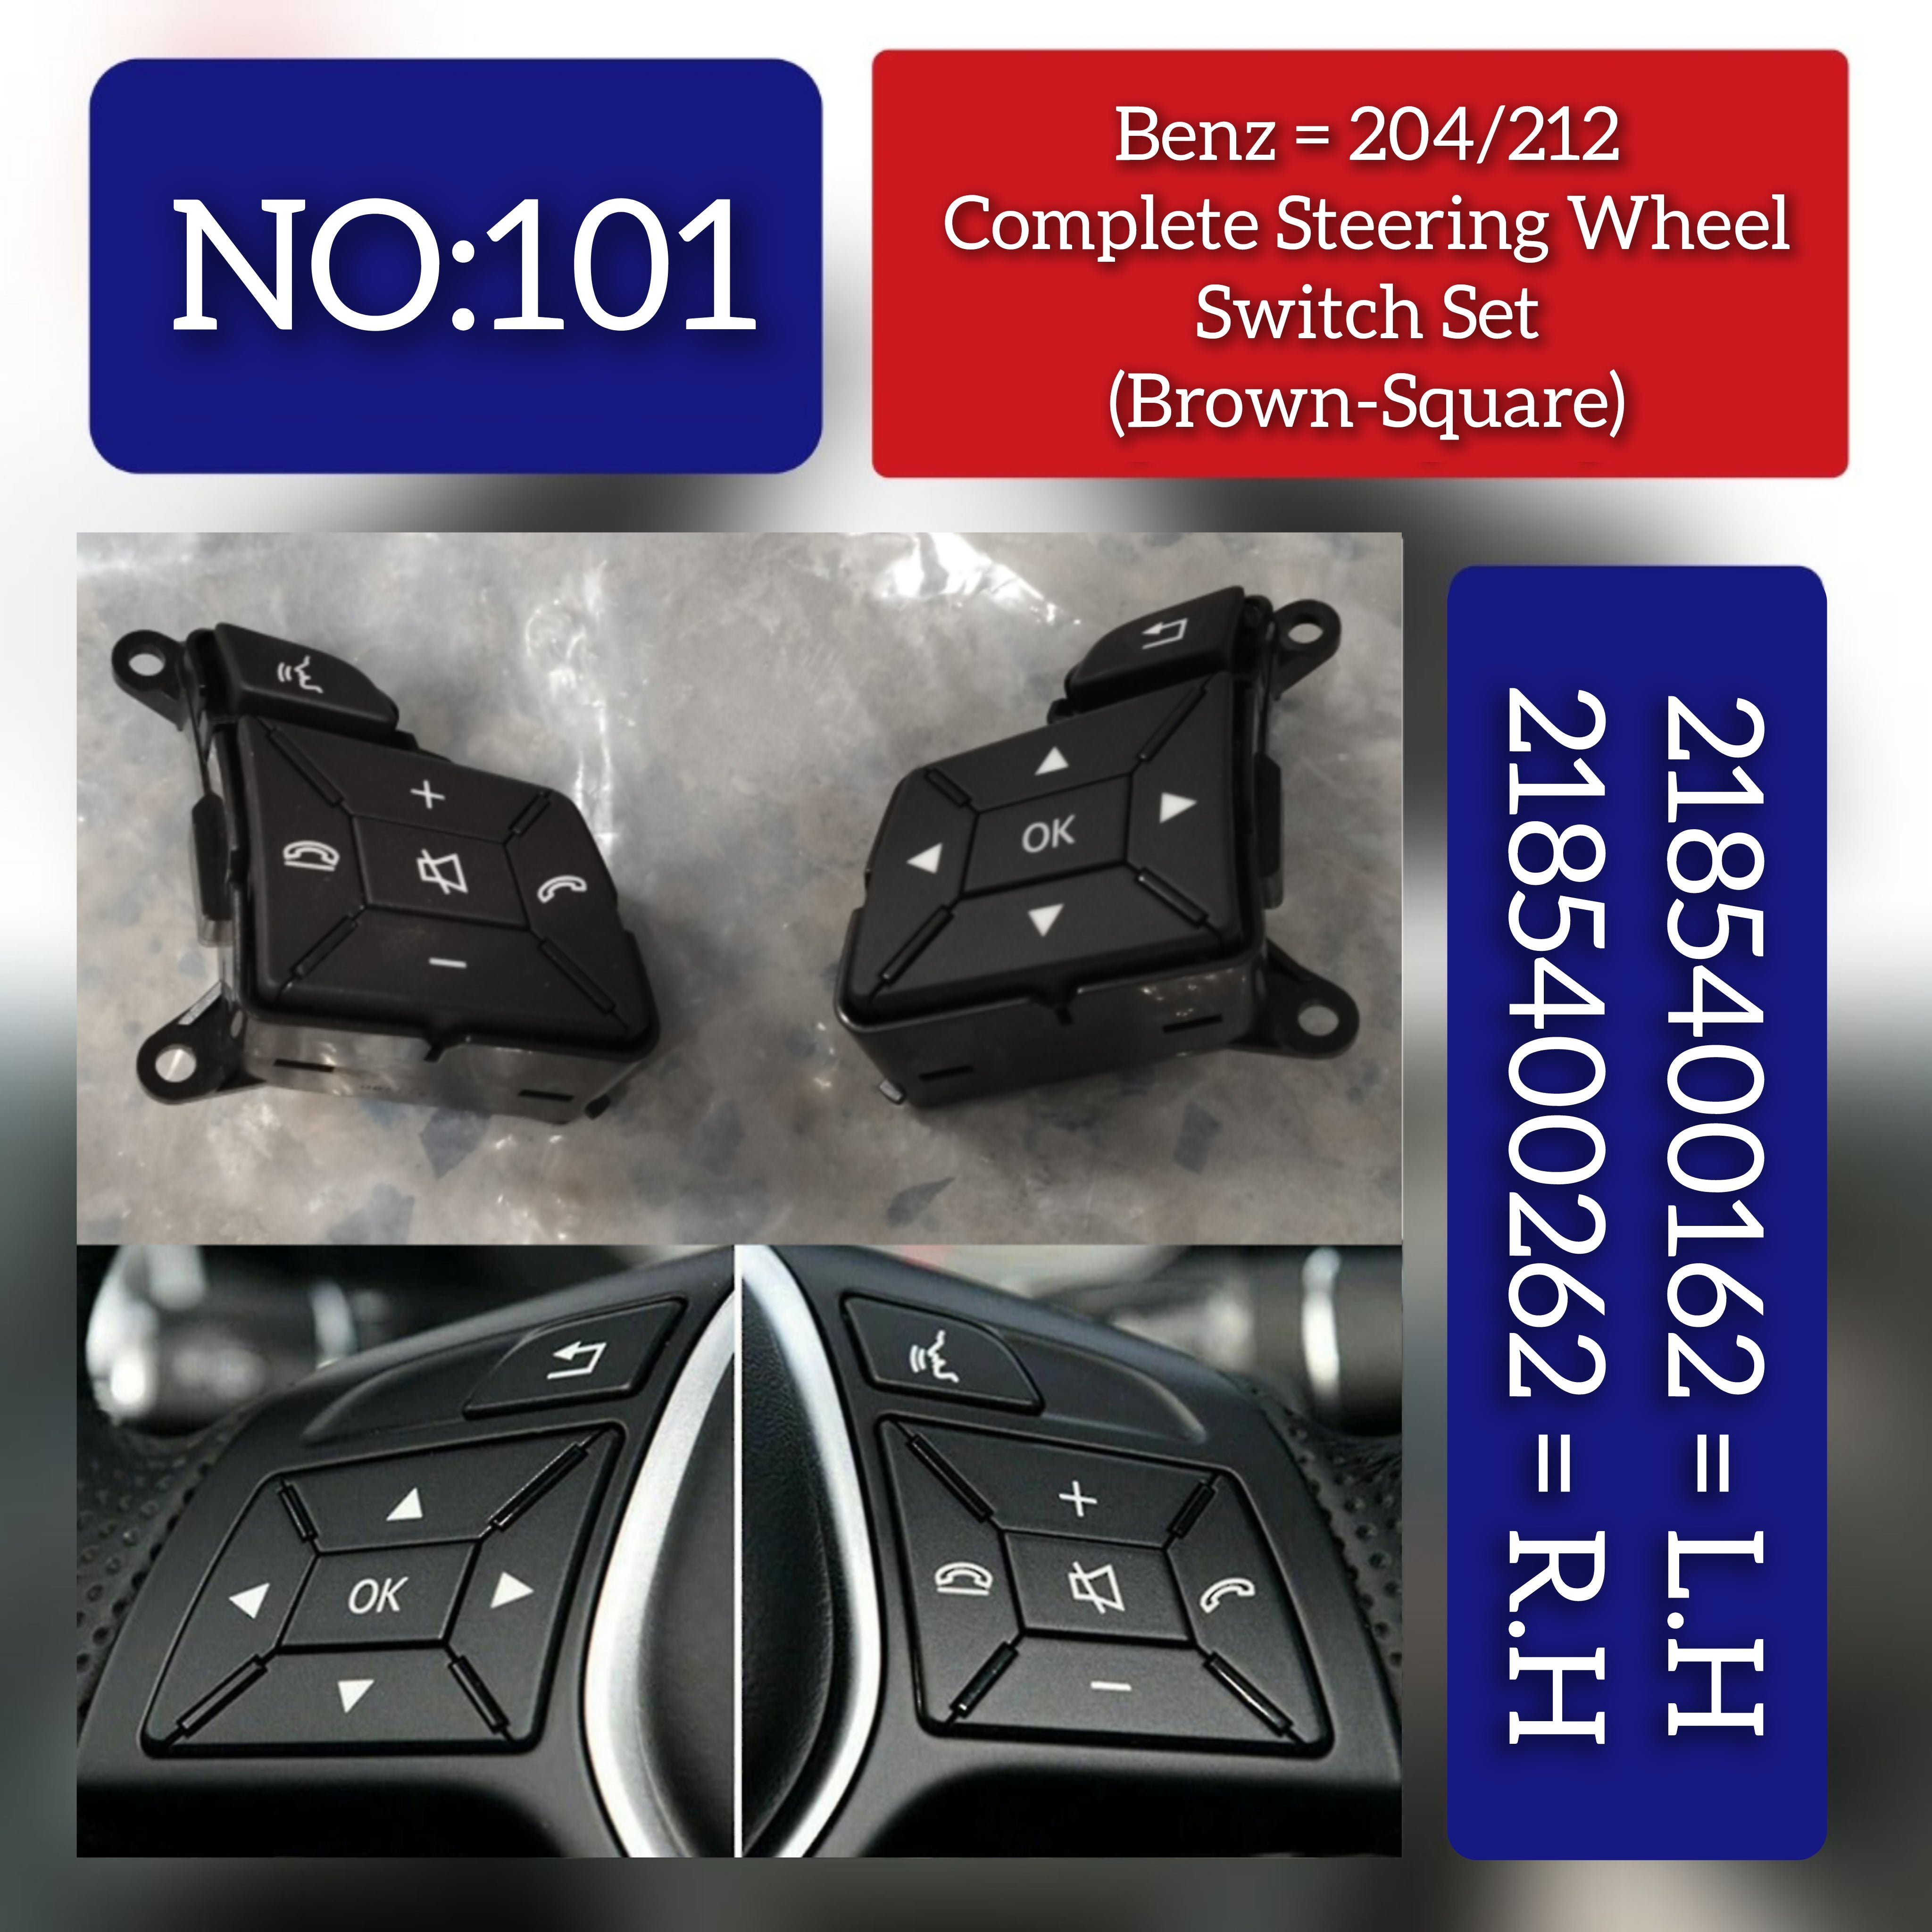 MERCEDES Benz C-CLASS W204 / E-CLASS W212 Steering Wheel Switch Brown-Square LH : 2185400162 & Rh : 2185400262 Tag-SW-101